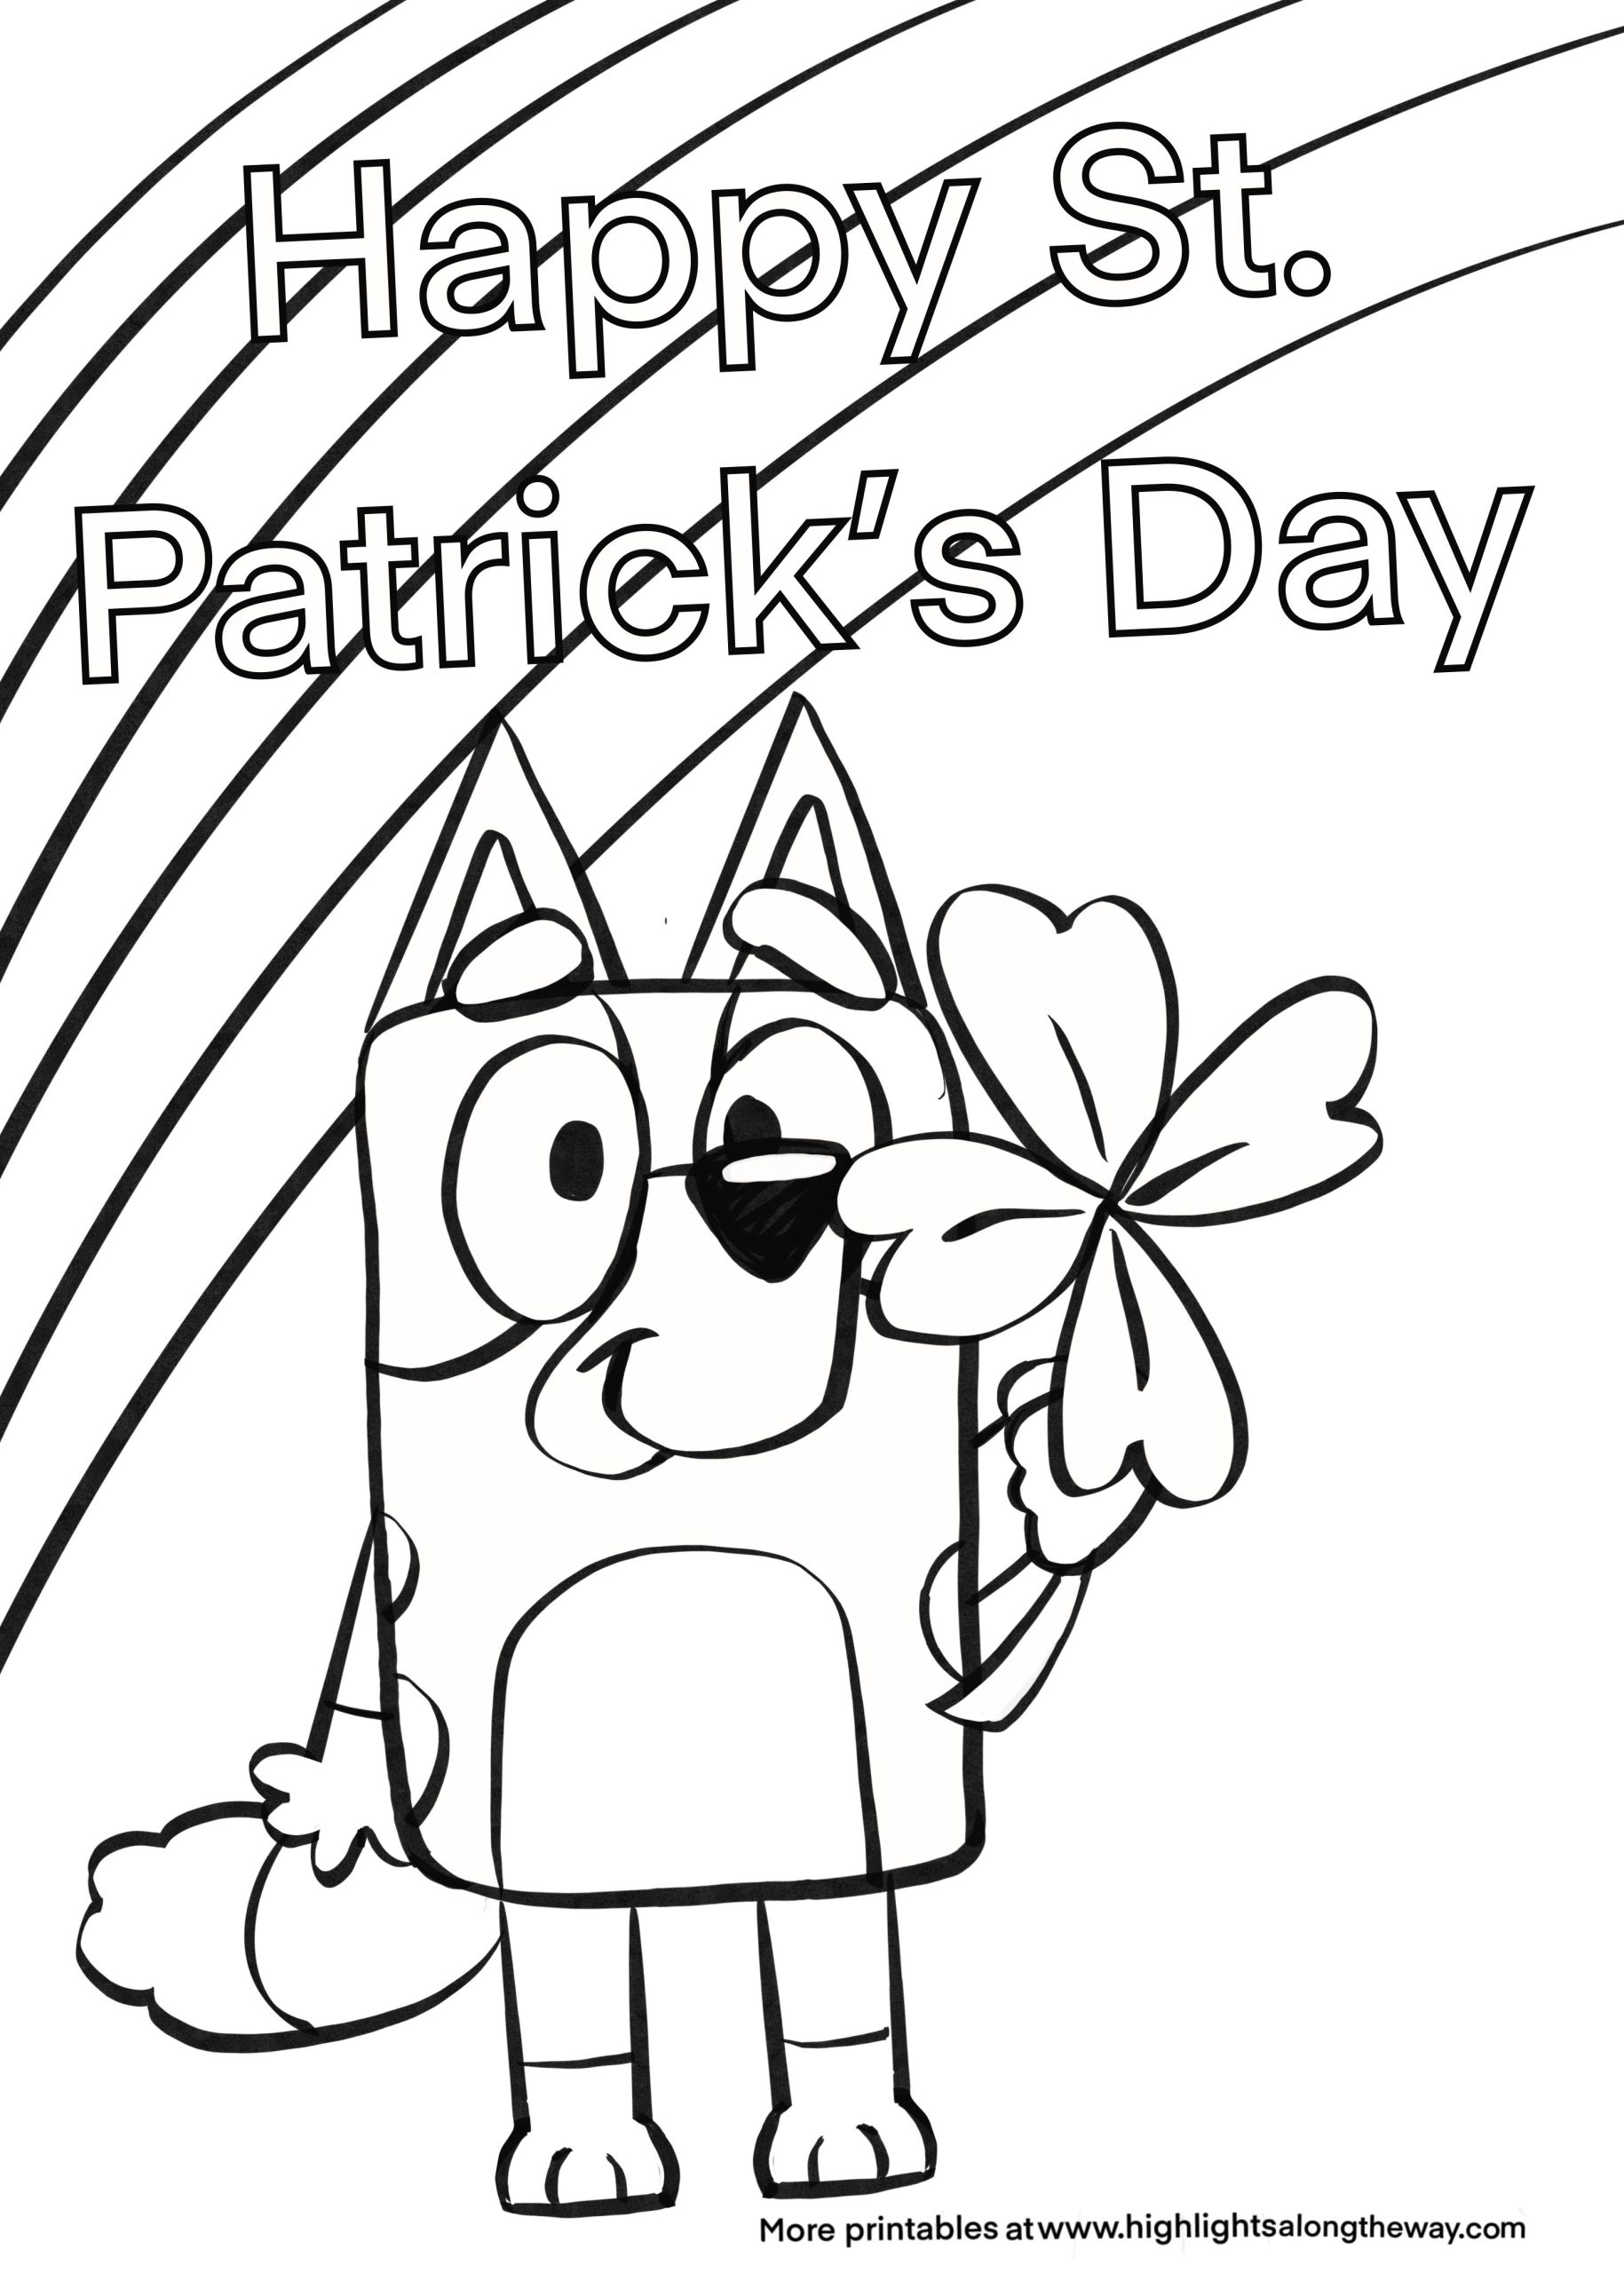 Bluey St Patrick s Day Coloring Page Instant Download